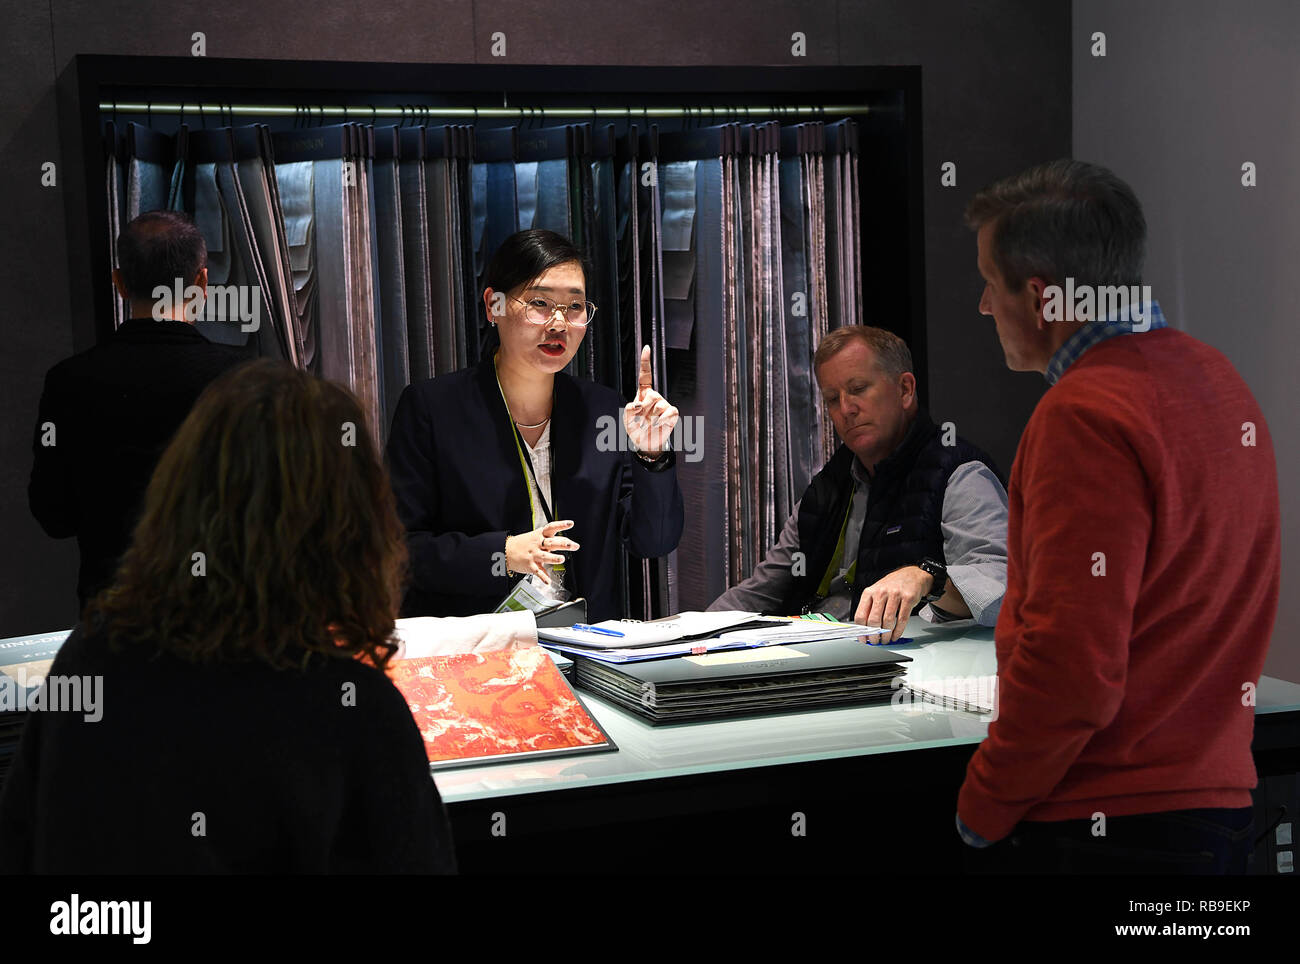 Frankfurt, Germany. 8th Jan, 2019. People visit a Chinese exhibition booth during Heimtextil in Frankfurt, Germany, on Jan. 8, 2019. The World's largest international trade fair for home and contract textiles, namely Heimtextil, kicked off Tuesday in Frankfurt. Credit: Lu Yang/Xinhua/Alamy Live News Stock Photo